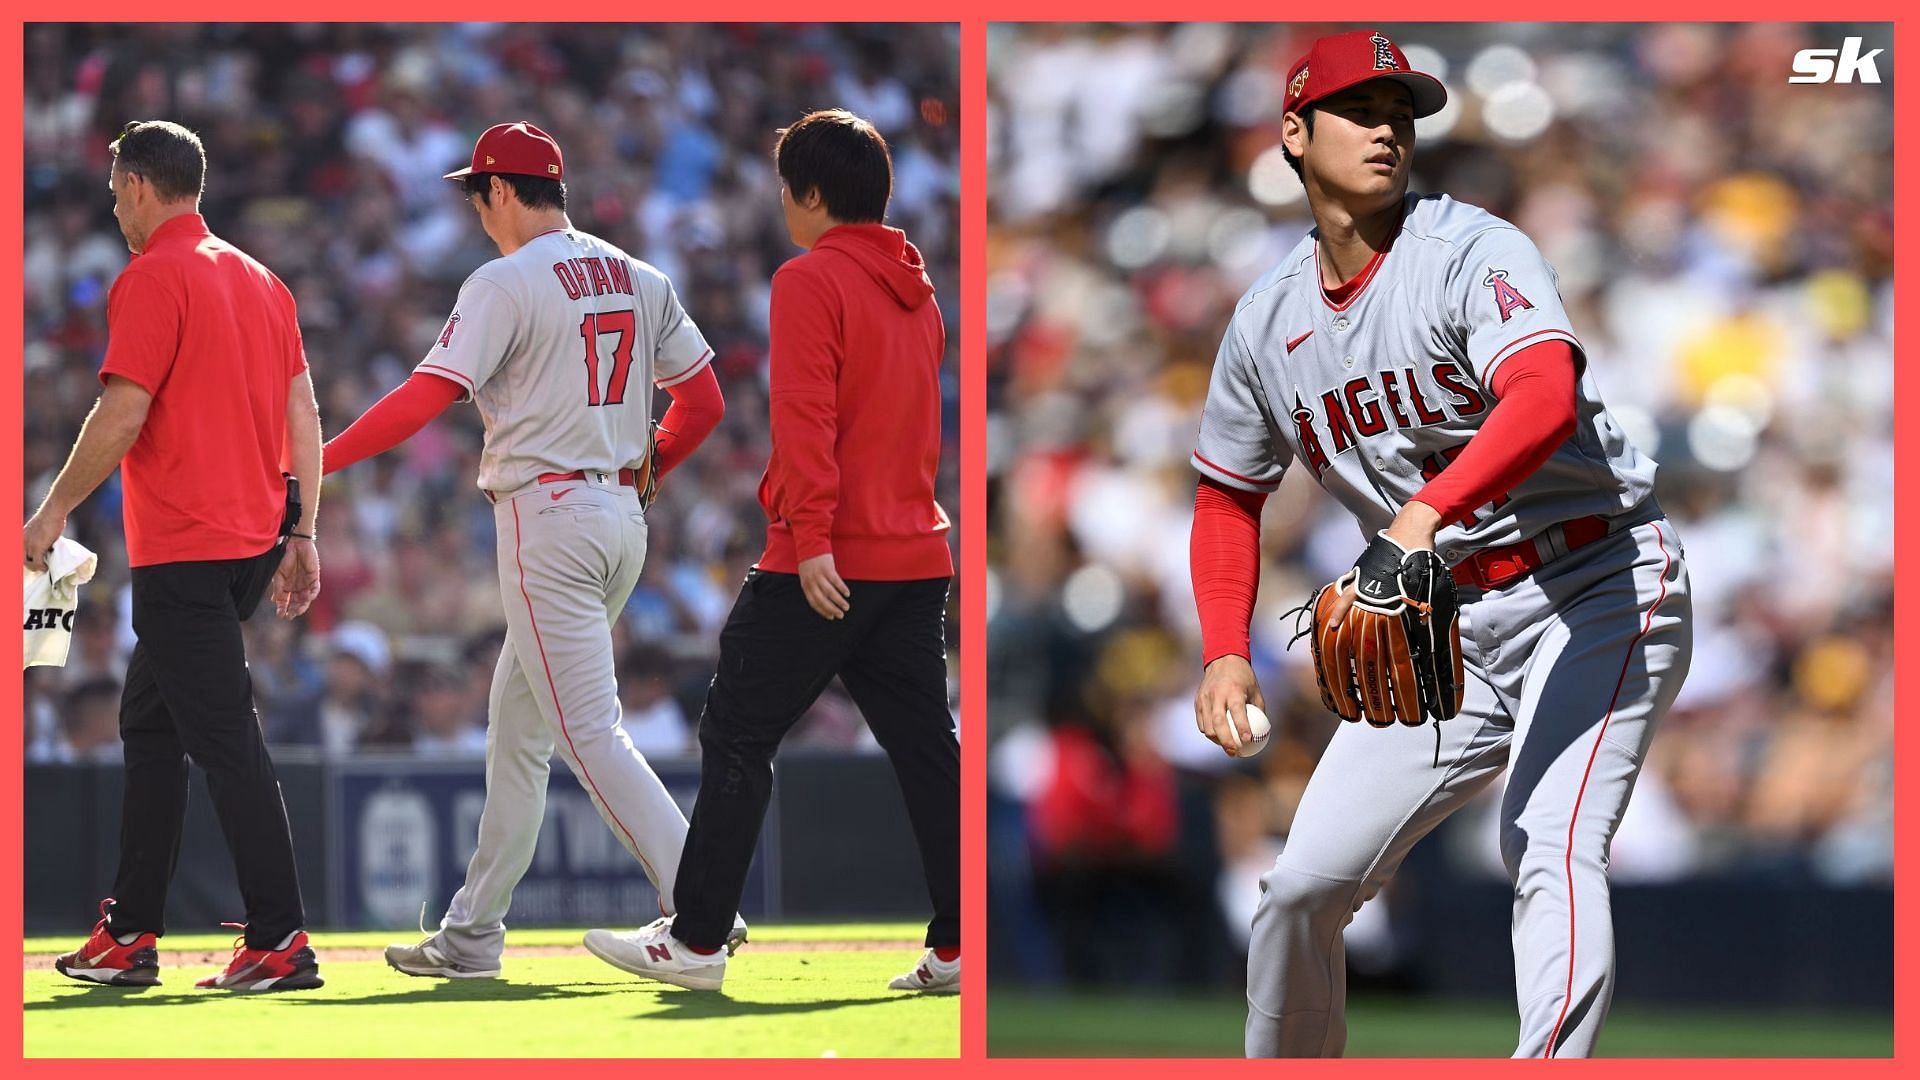 Shohei Ohtani pitching for the Los Angeles Angels left the game early against the San Diego Padres due to blisters in his hand.